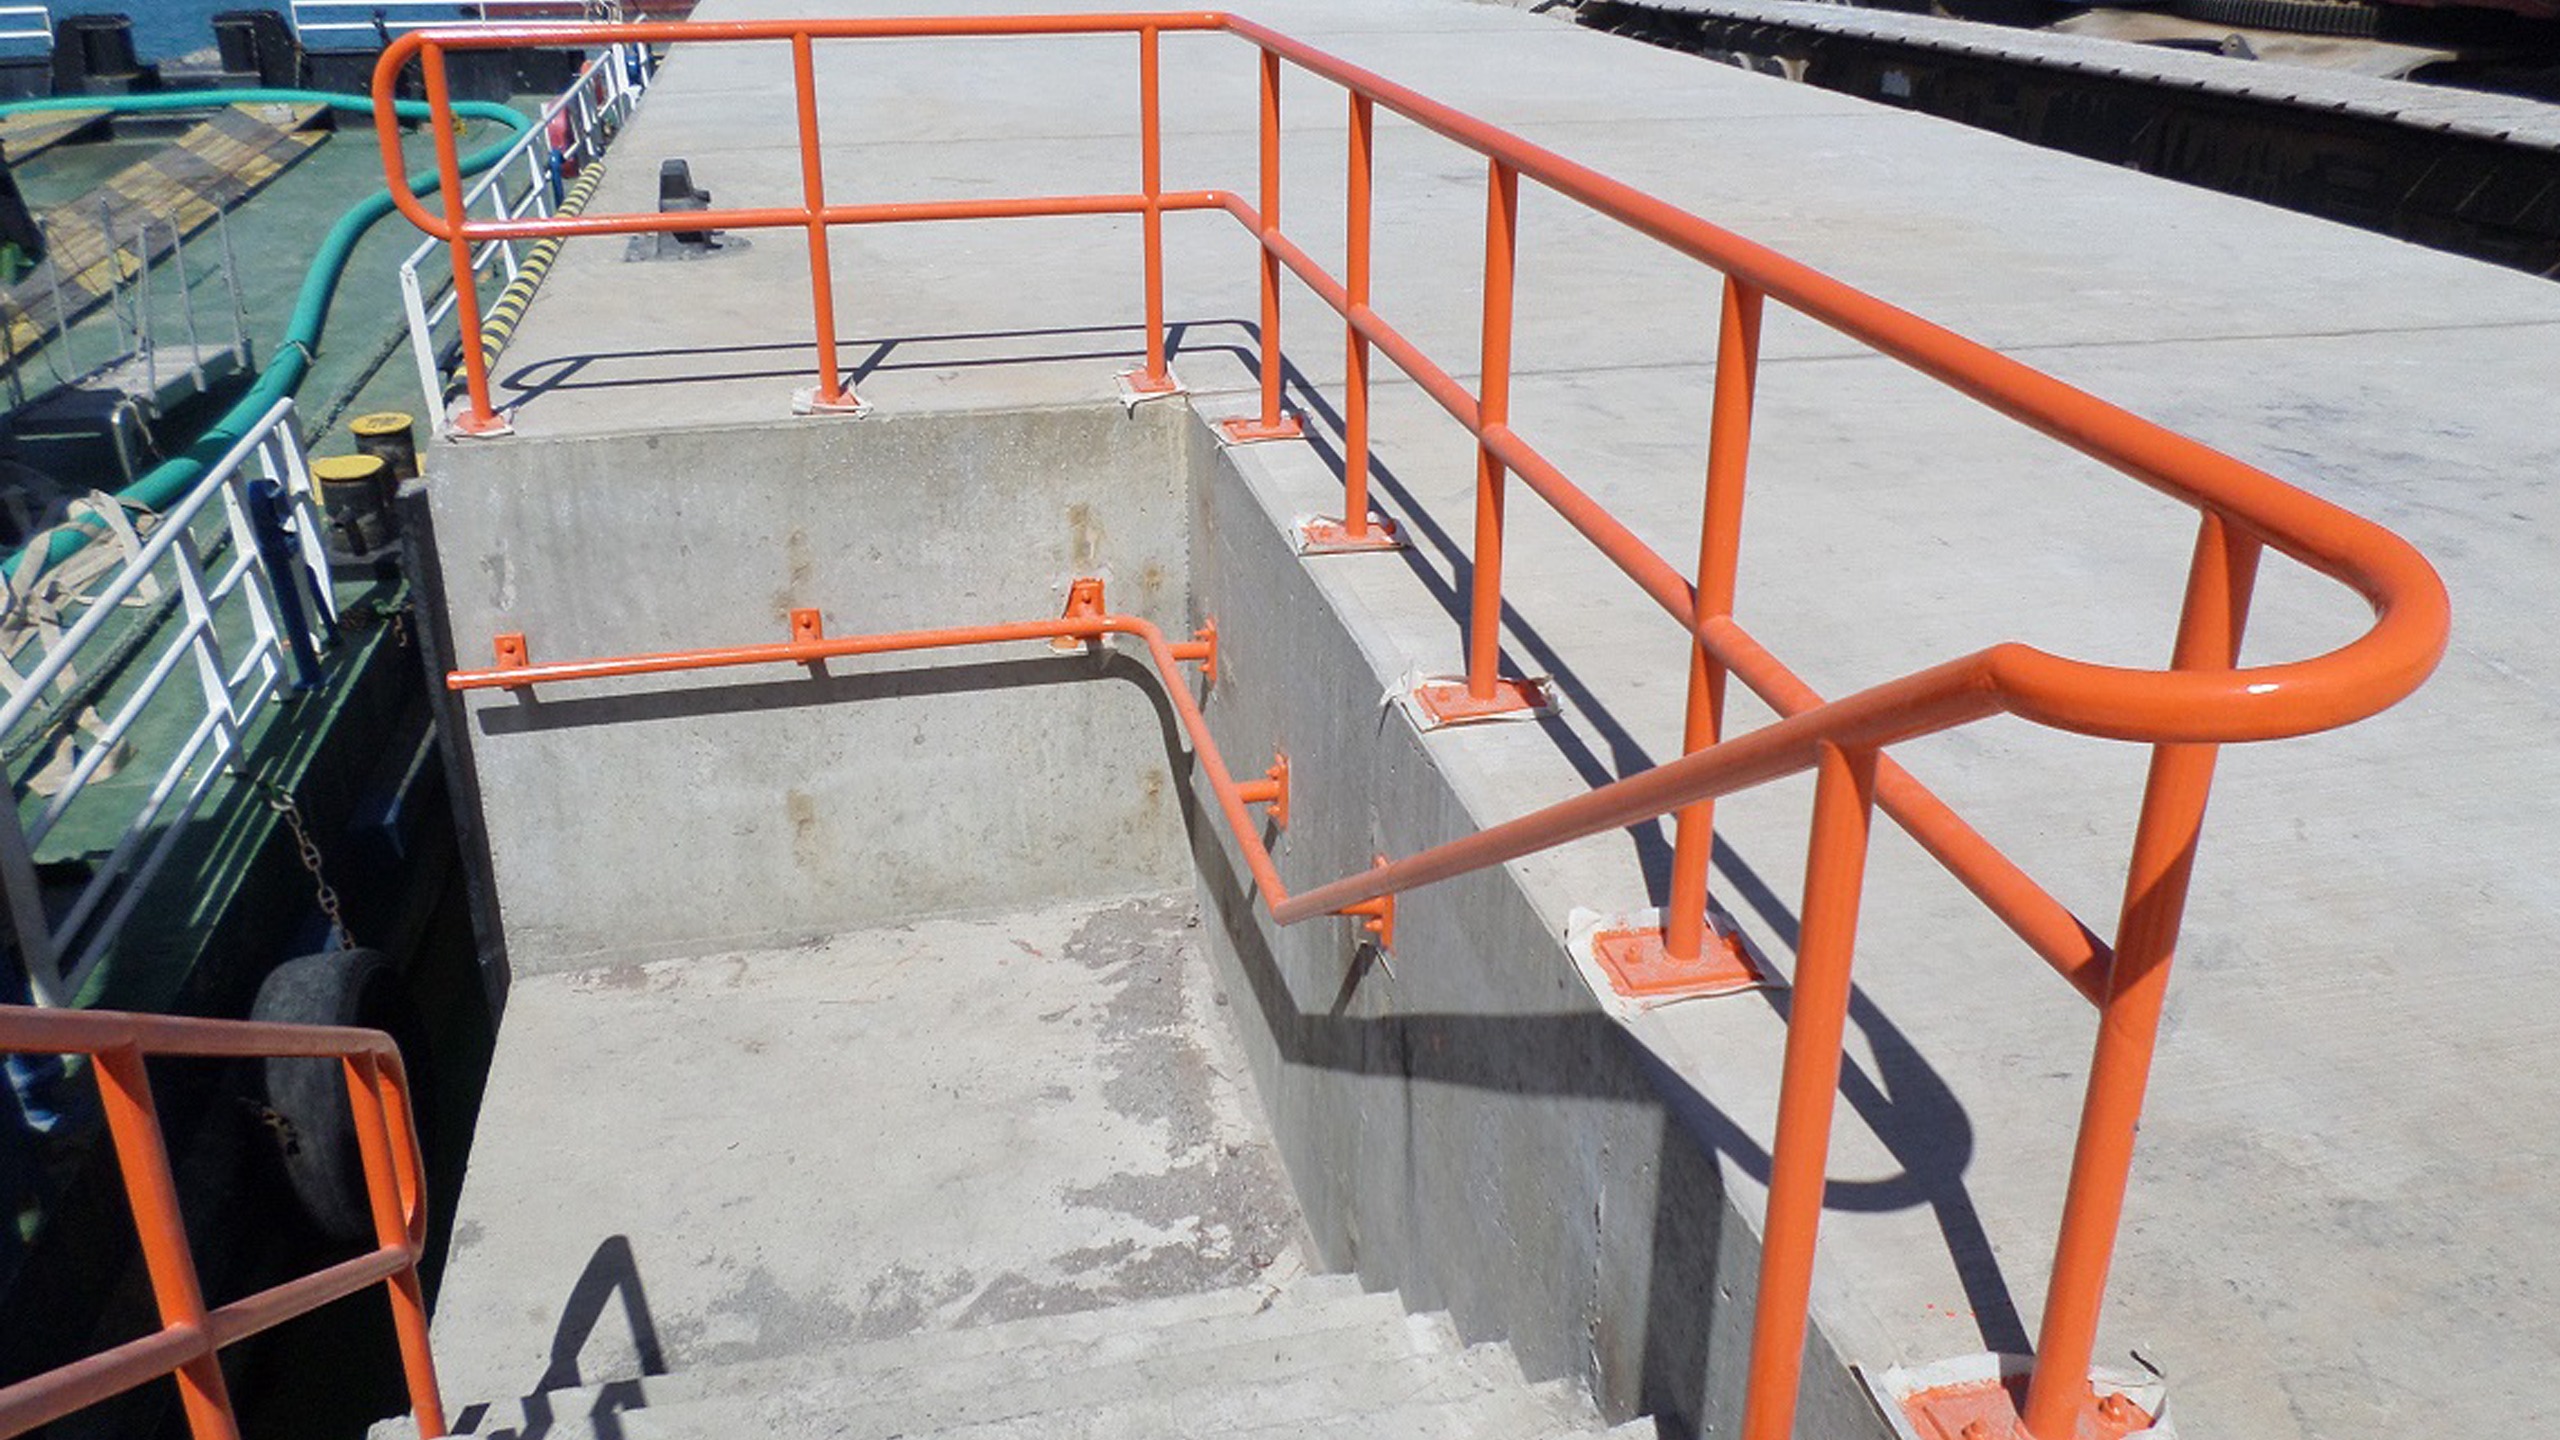 Marine Project – Catwalk and Dikewall Manufacturing, Blasting and Painting Works